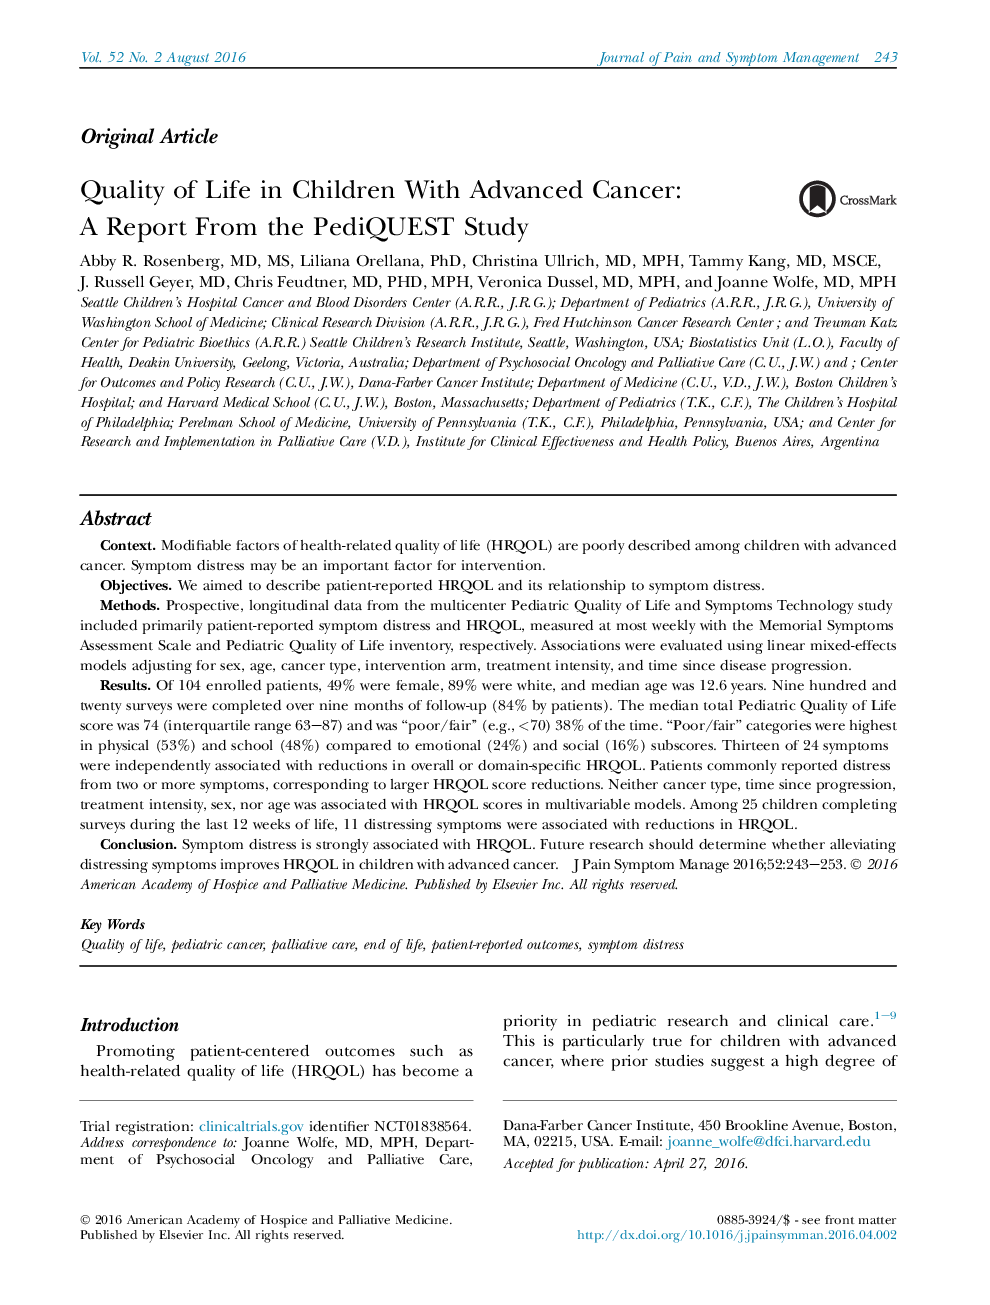 Original ArticleQuality of Life in Children With Advanced Cancer: A Report From the PediQUEST Study